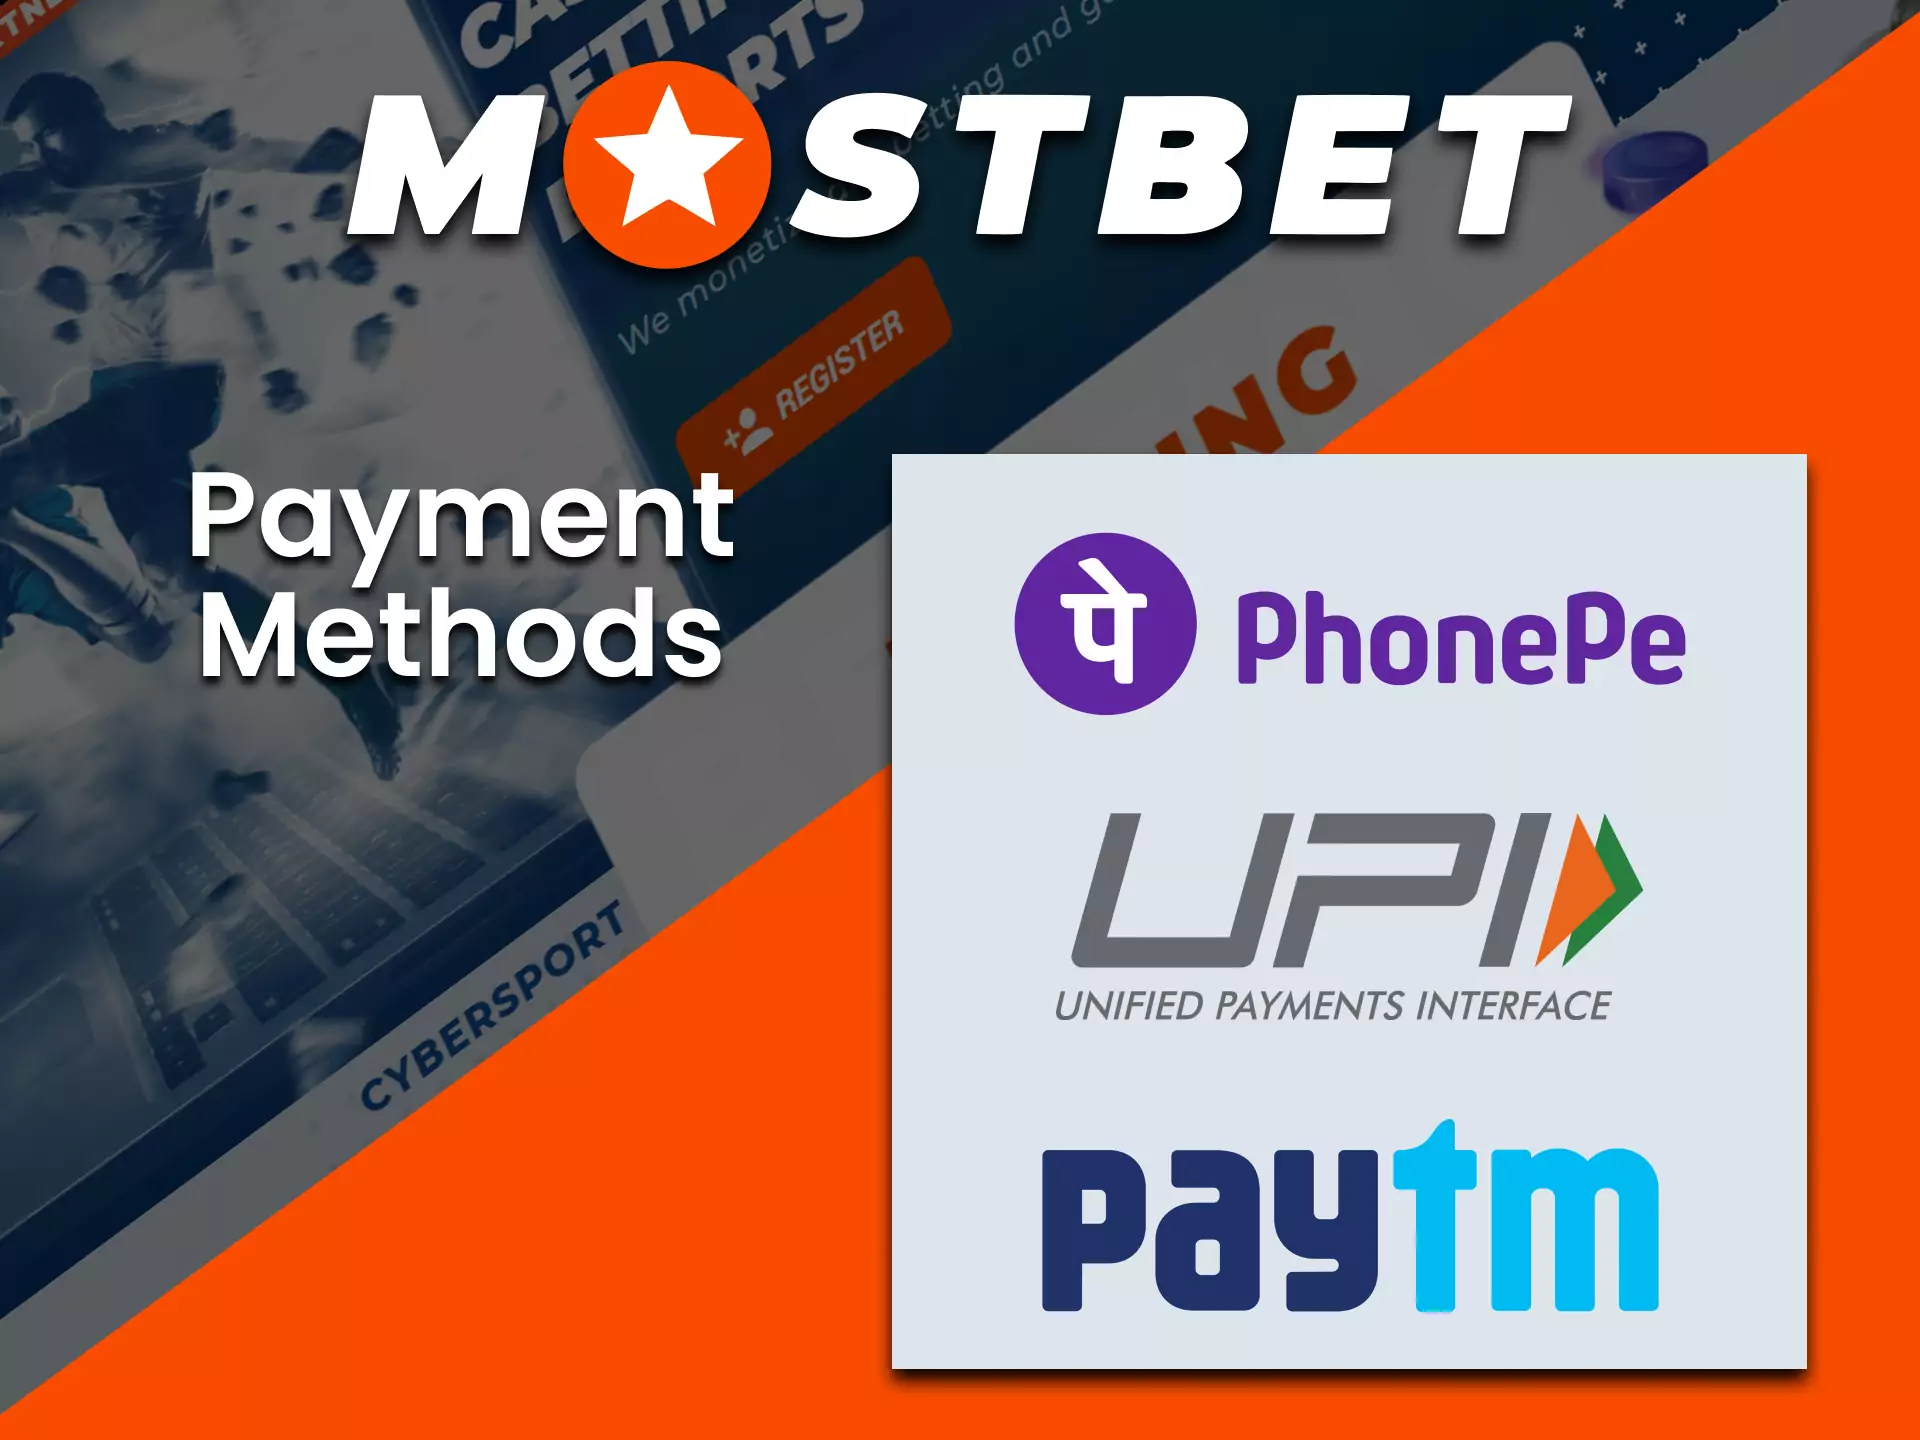 You can withdraw money from your Mostbet account with the most popular Indian payment systems.